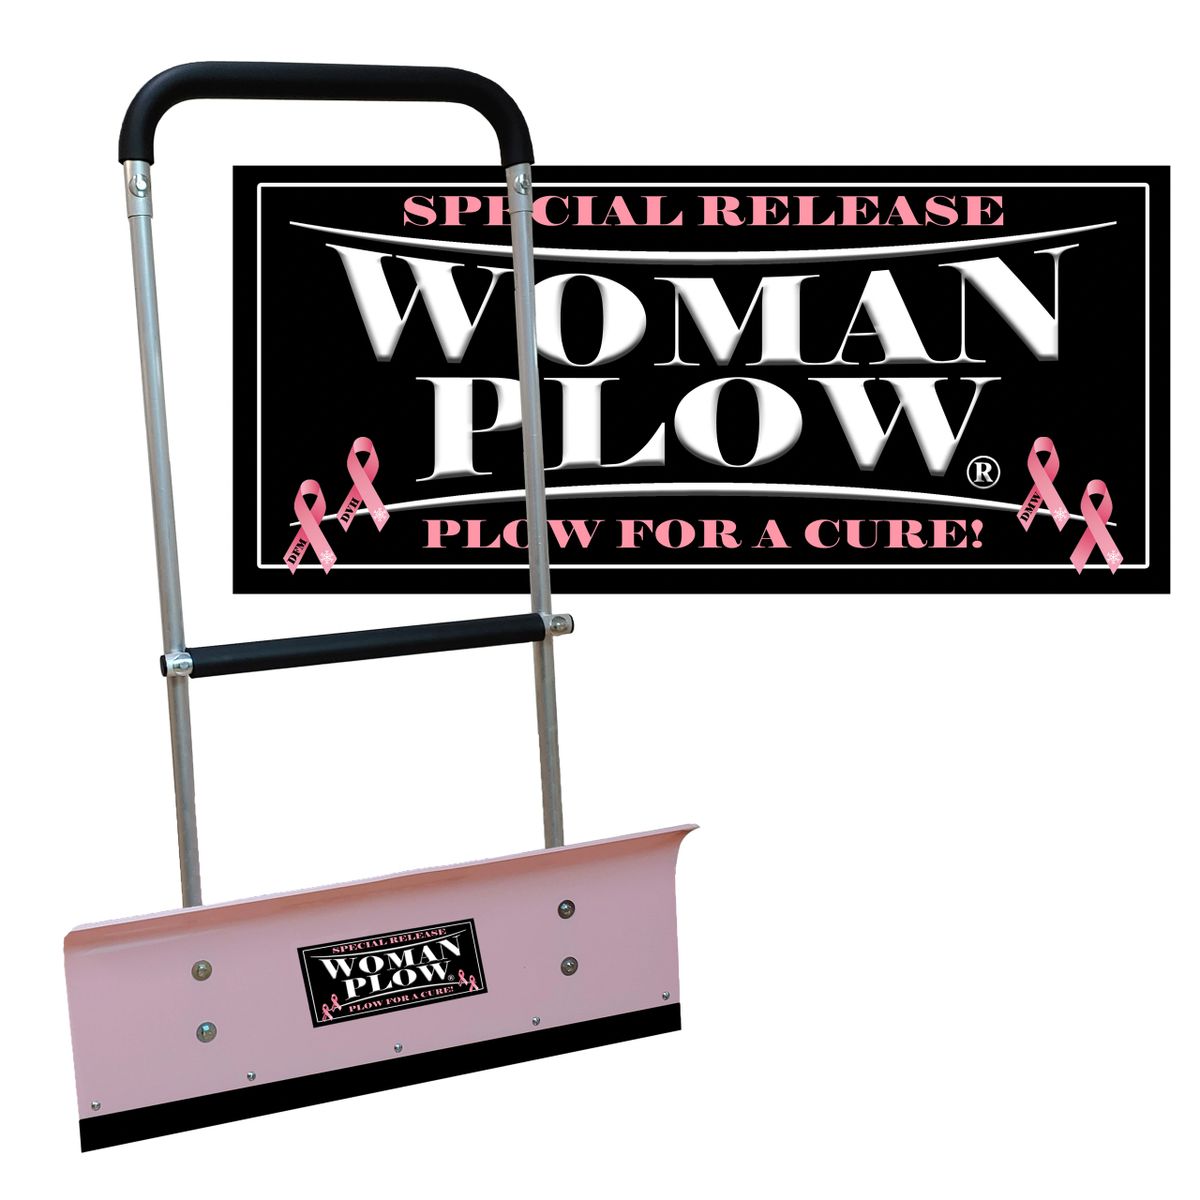 MANPLOW PRO32 Breast Cancer Awareness Special Release with Grab Bar